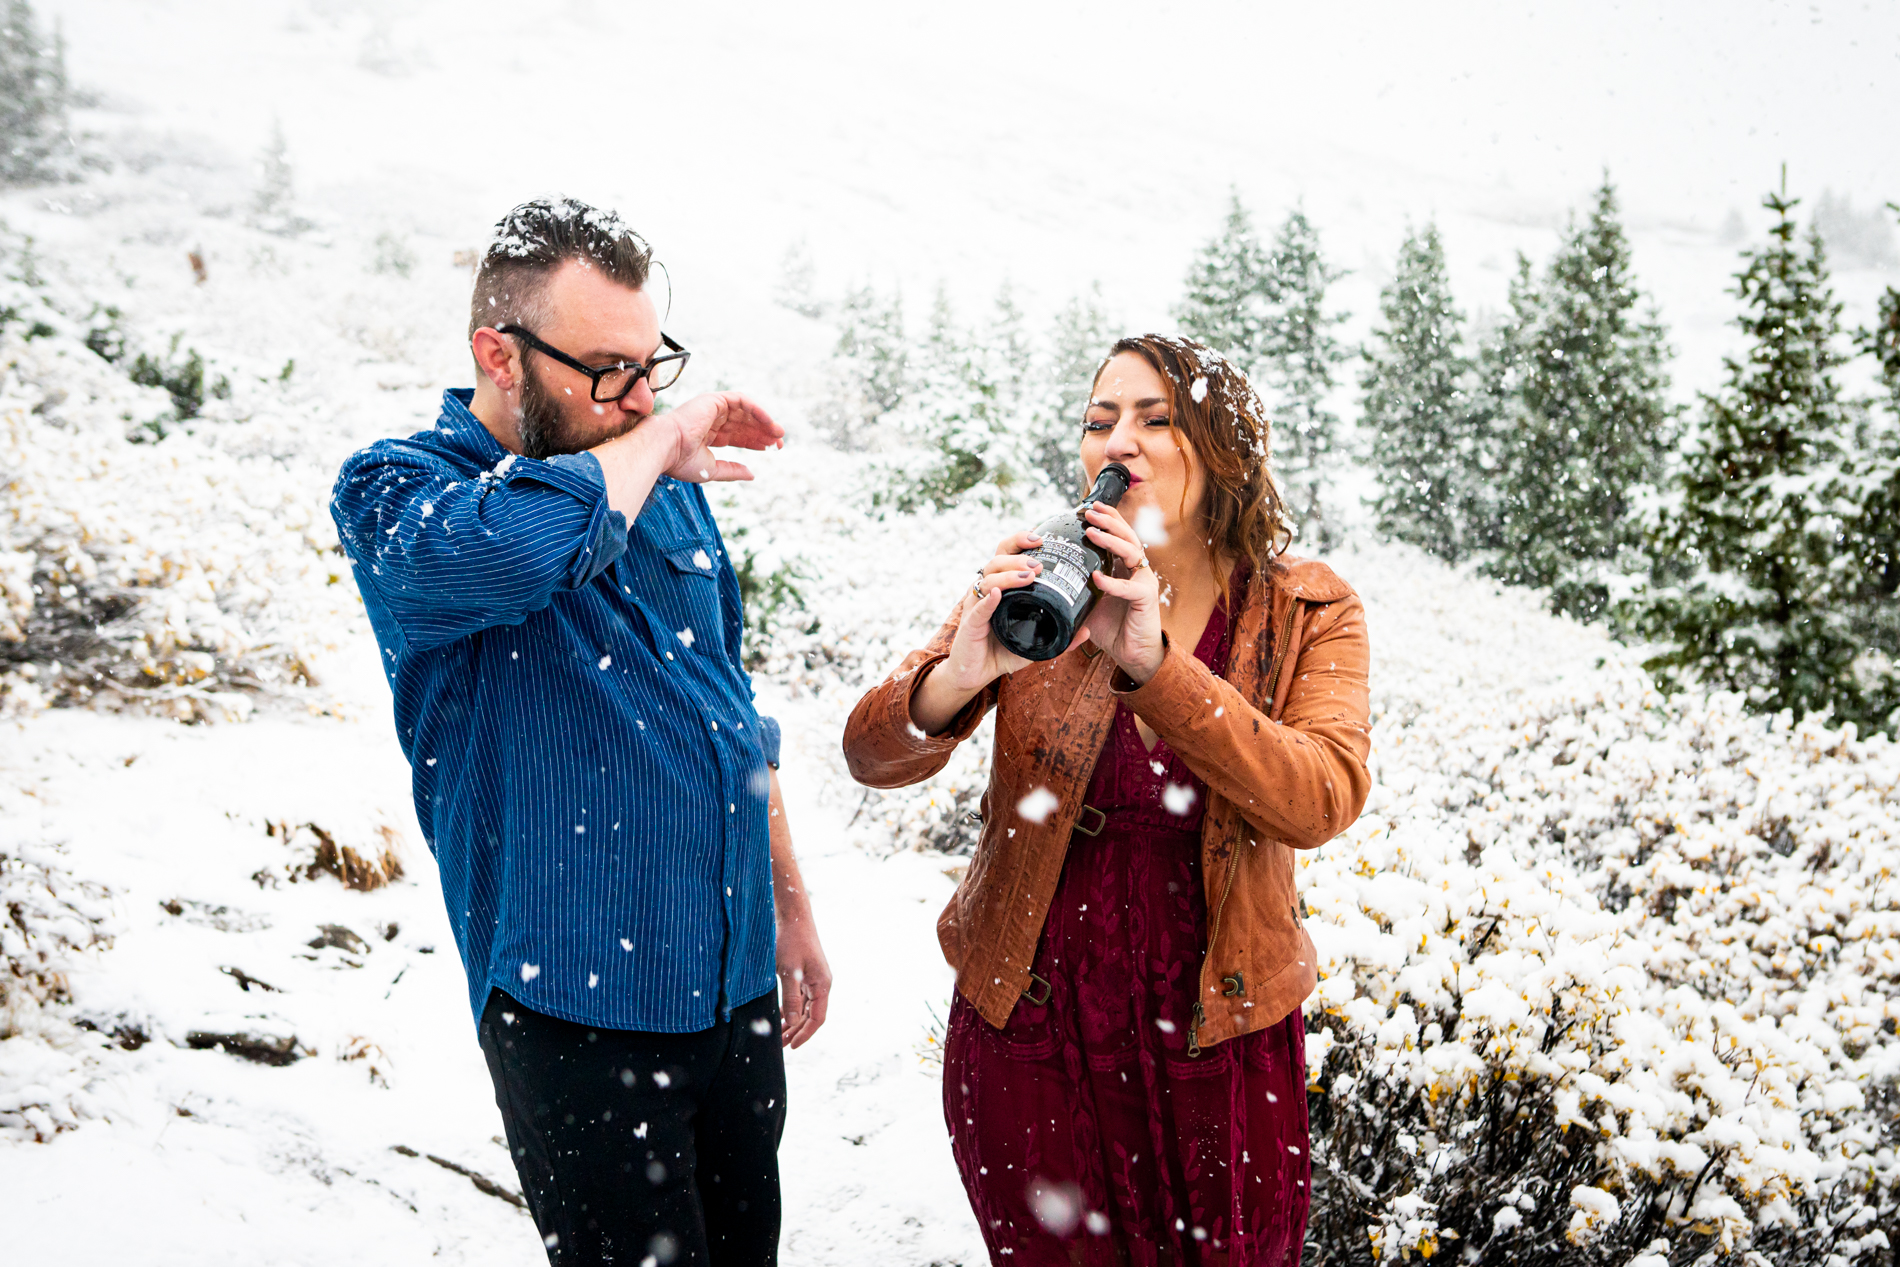 Cottonwood Pass Engagement Photos in Buena Vista with fall foliage, mountains and a winter blizzard